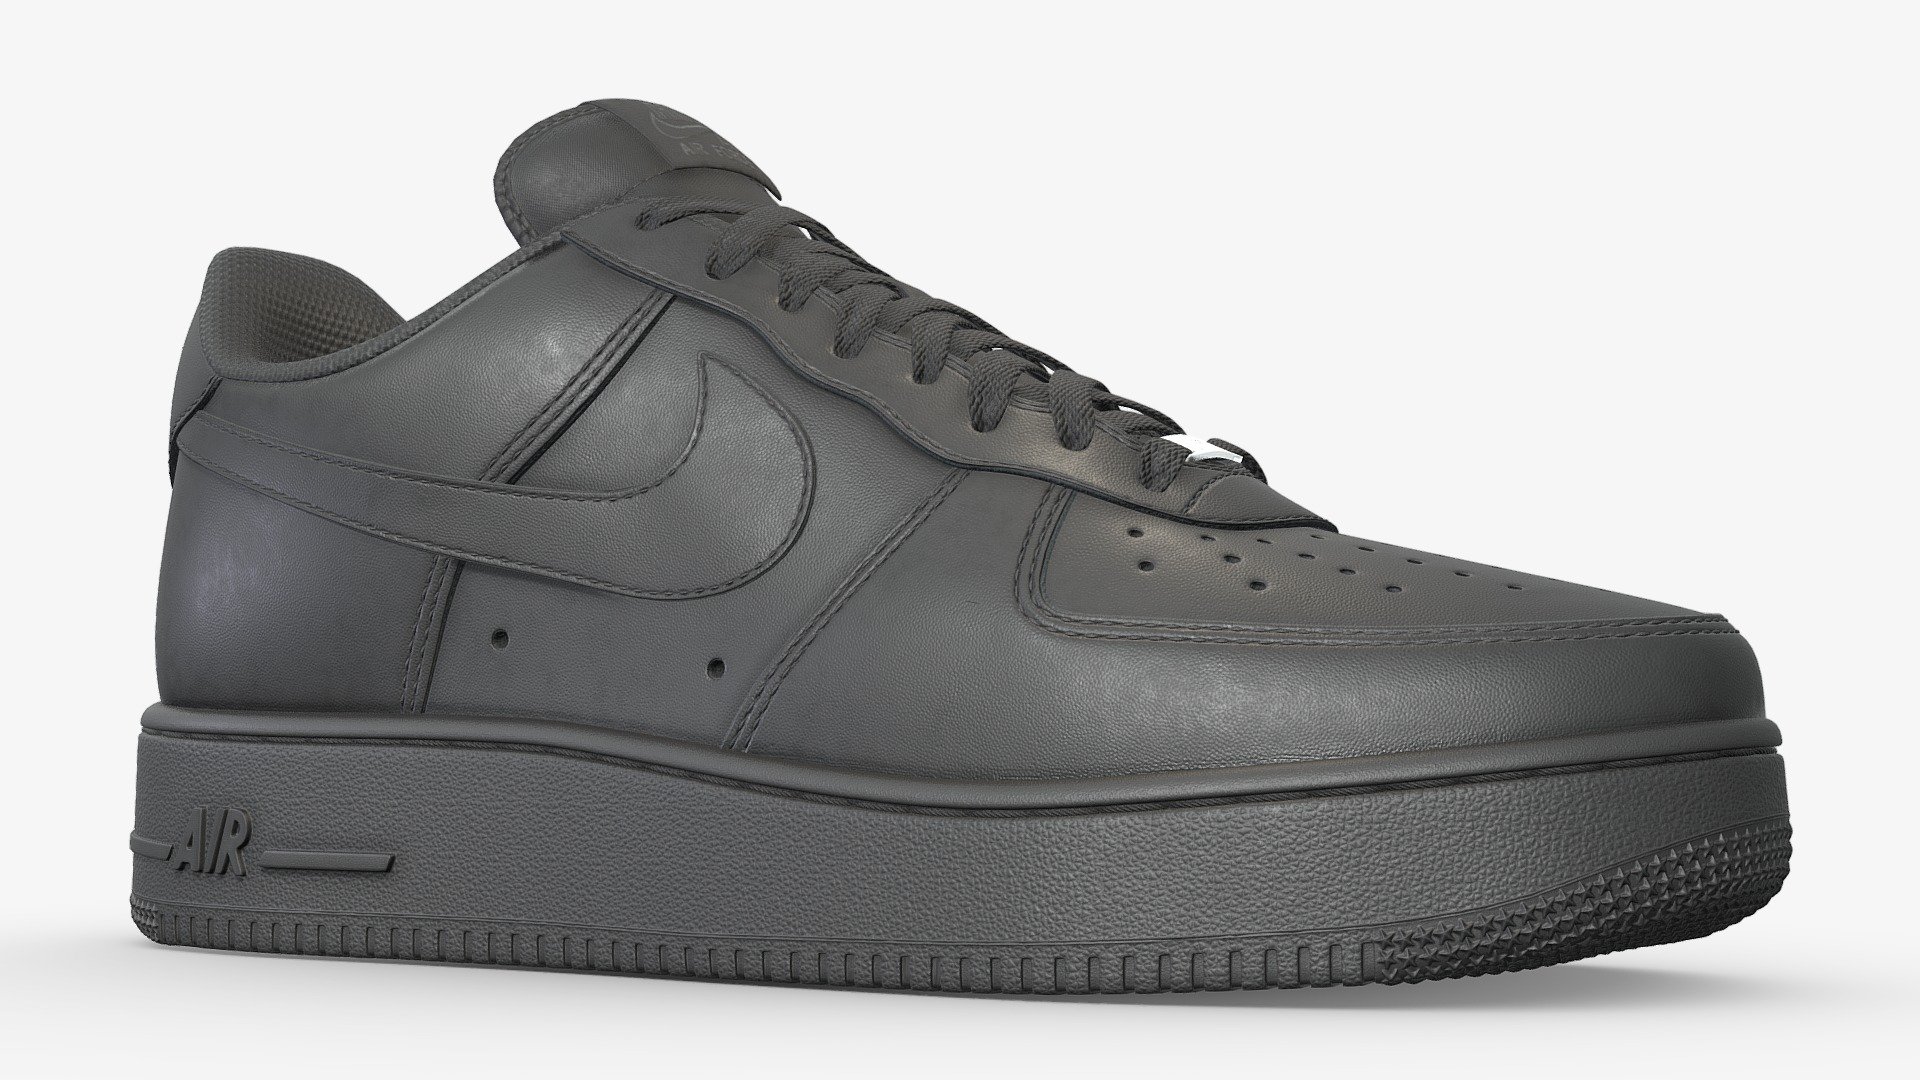 Nike Air Force 1 in Black. The most popular sneaker on the planet, and a staple in many wardrobes. Made with a high attention to detail, this rendition of the shoe aims provide the highest fidelity possible, from all angles

The shoe displayed here has been subdivided once, as have the obj and fbx files. The blender file will allow you change this detail, and also has the added details of stitches and the stars on the sole as separate objects so they can be removed if desired (though the shoe looks best with them)

There are four texture sets for each shoe with the maps being Base Color, Metallic, Roughness, Normal, Opacity (through the alpha channel of the base color). These maps are at a resolution of 4096x4096 in png

This subdived version has 517,927 polys, with the unsubdivided coming in at 130,332. An optimised version is included, which uses just one texture set and has 15,605 polys, can be viewed here: https://skfb.ly/oE7wV
Finally, the white colourway of this shoe is included in the additional files - Nike Air Force One Black - Buy Royalty Free 3D model by Joe-Wall (@joewall) 3d model